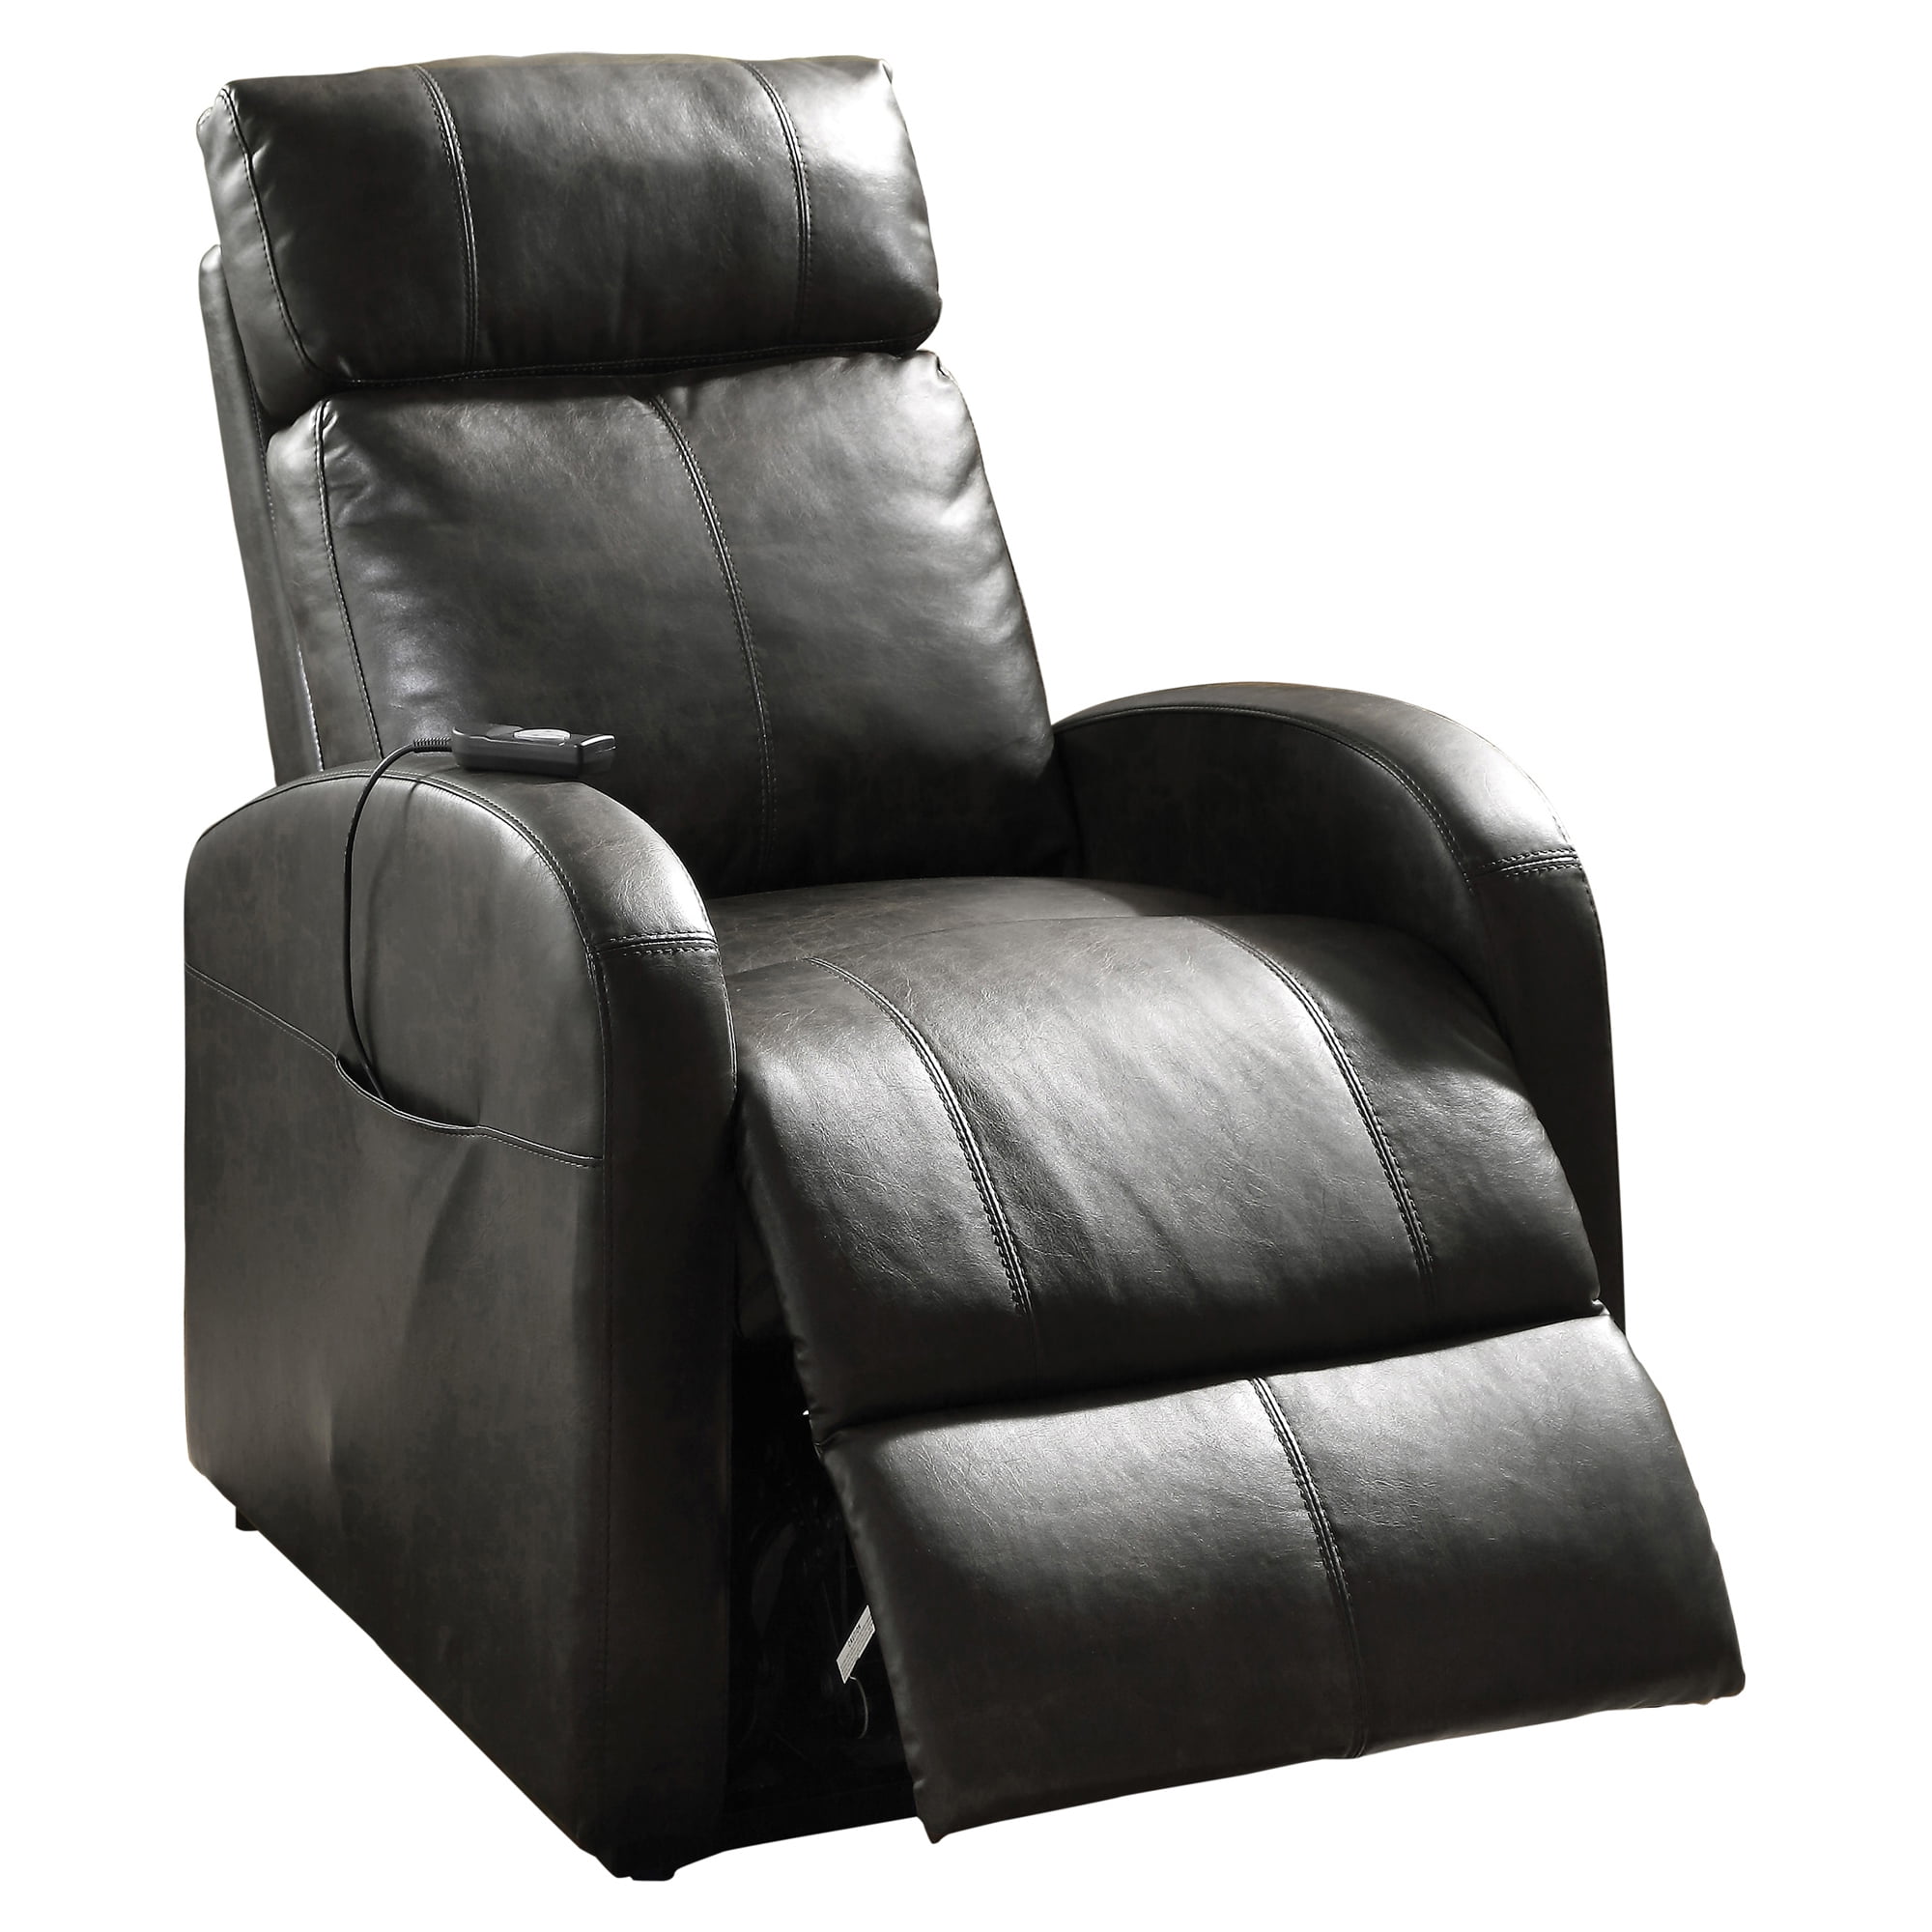 Picture of ACME 59405 Ricardo Recliner with Power Lift, Dark Gray PU - 40 x 28 x 37 in.